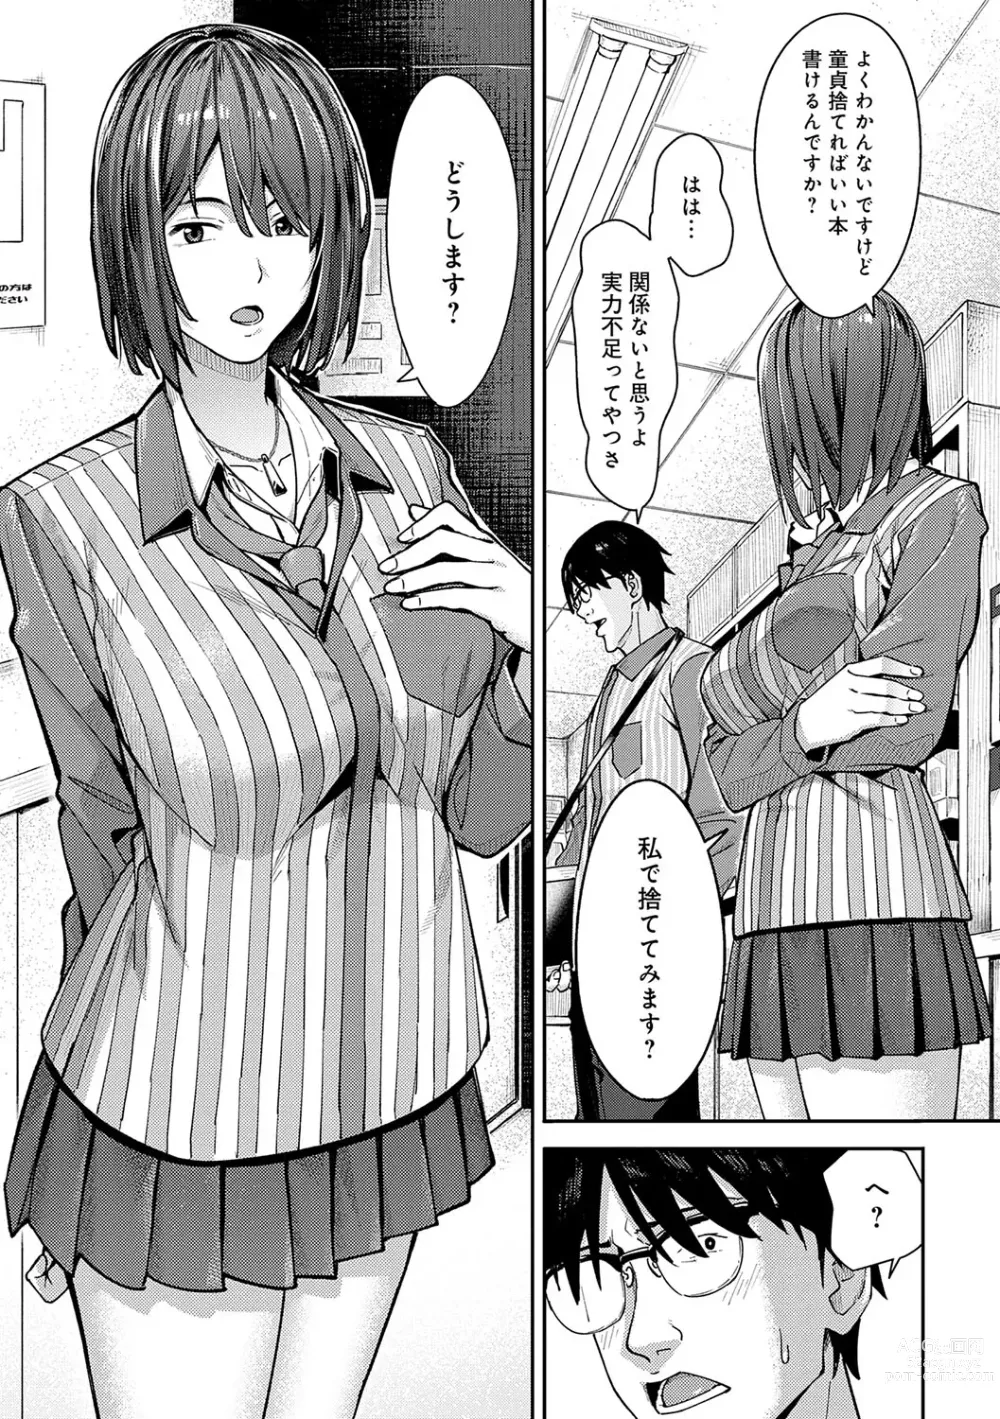 Page 8 of manga Toriaezu, Yattemiyo. - Lets have sex for now.